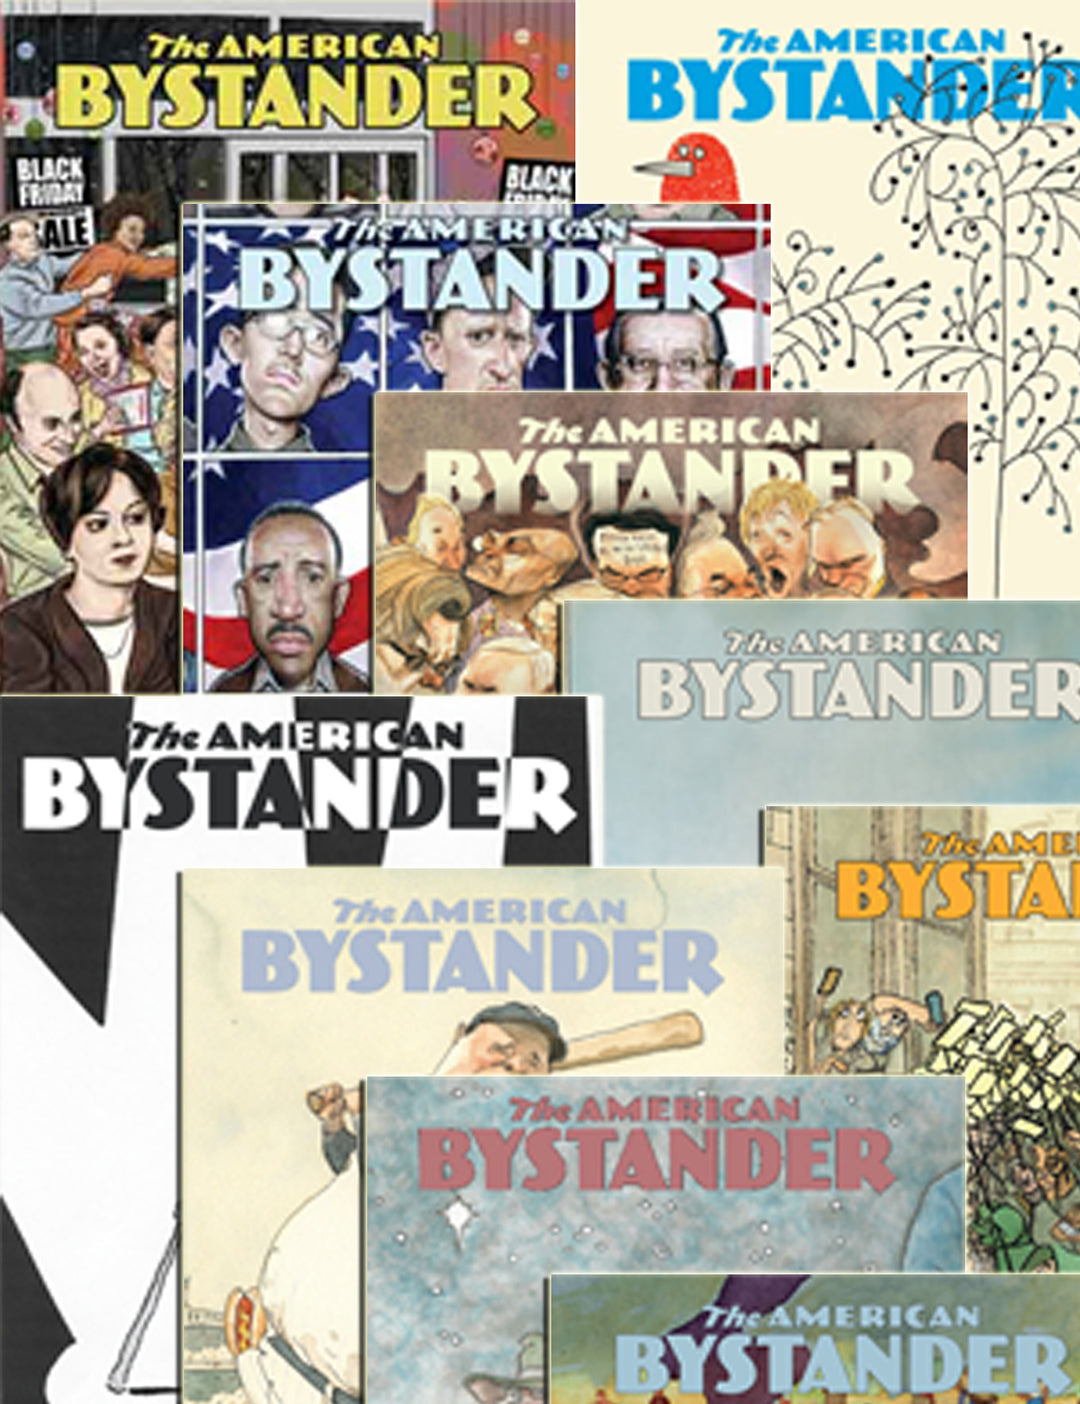 The American Bystander | Full Digital Archive Issues #1-28